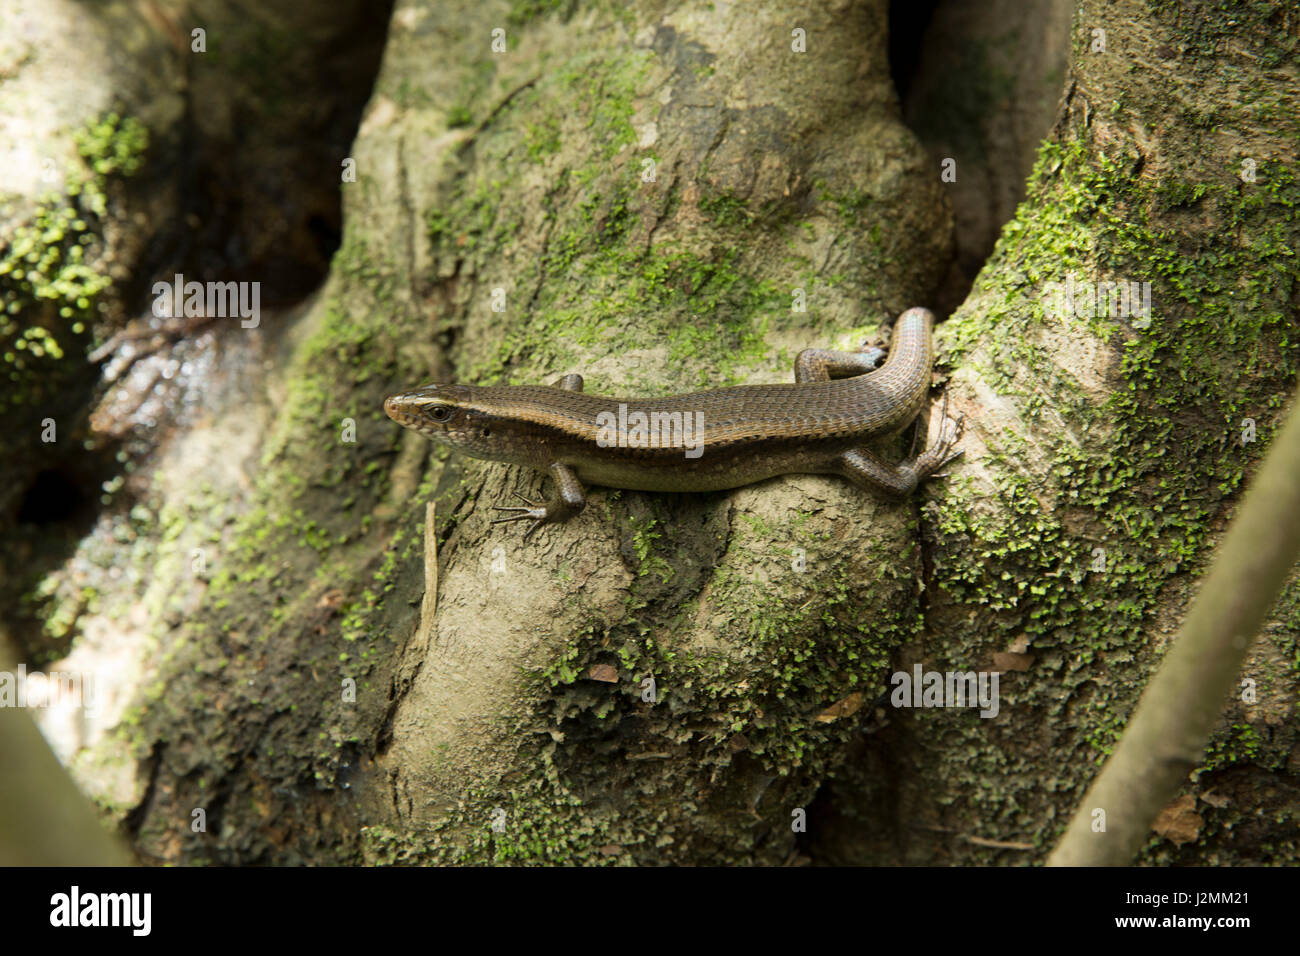 Keeled Grass Skink also called Lanzana on the Ratargul fresh water swamp forest. It is a very interesting and thrilling place for adventurous tourists Stock Photo